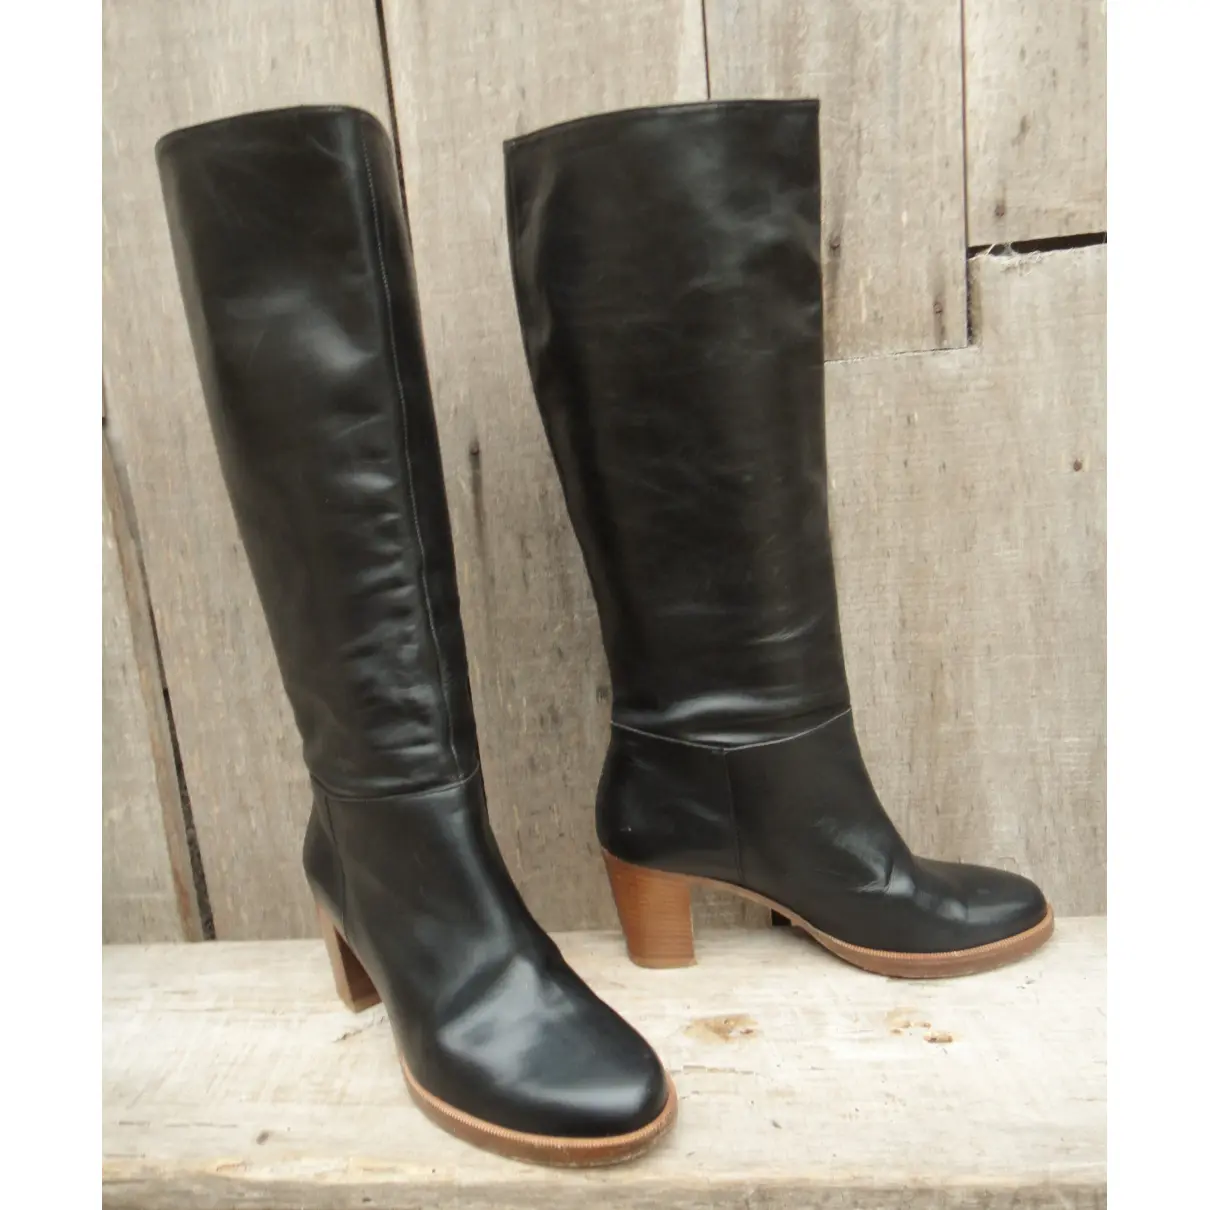 Buy Robert Clergerie Leather boots online